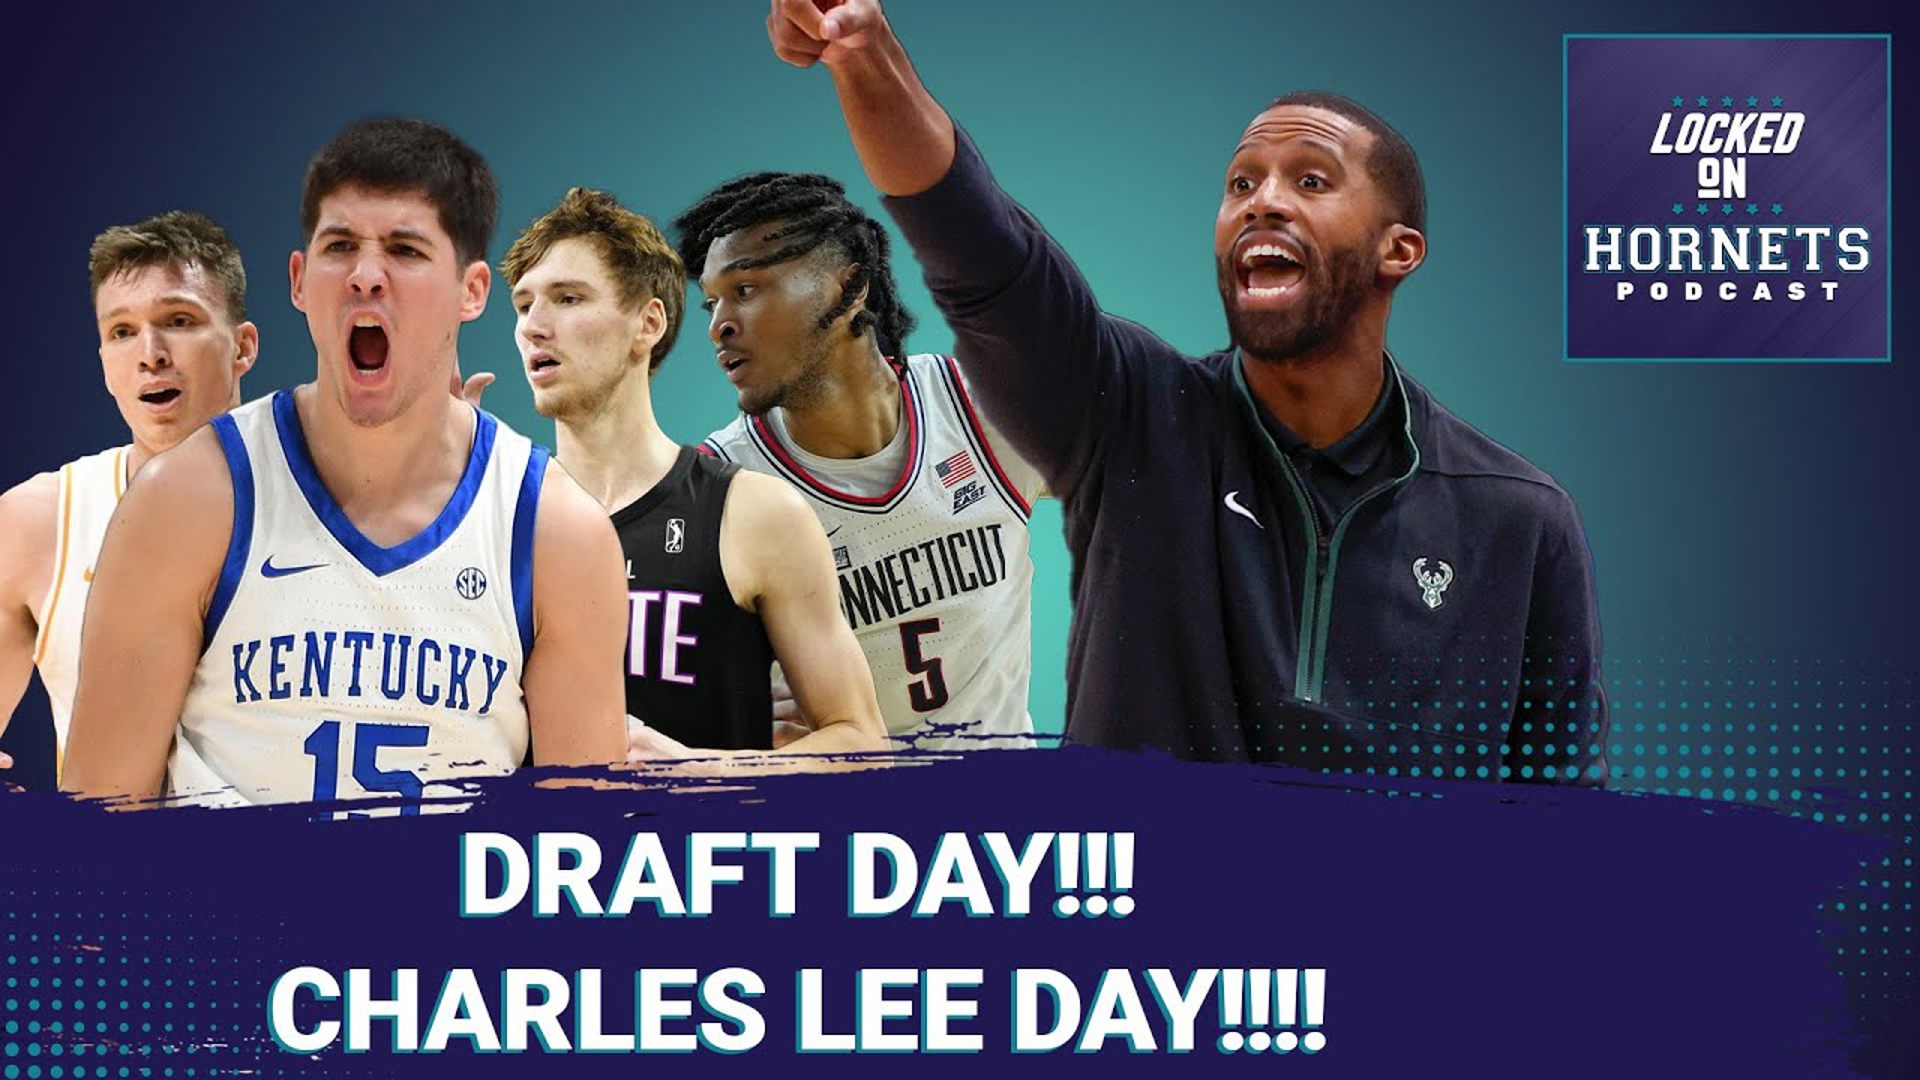 Draft Day!!! What will the Charlotte Hornets do + Charles Lee introduced as Hornets Head Coach